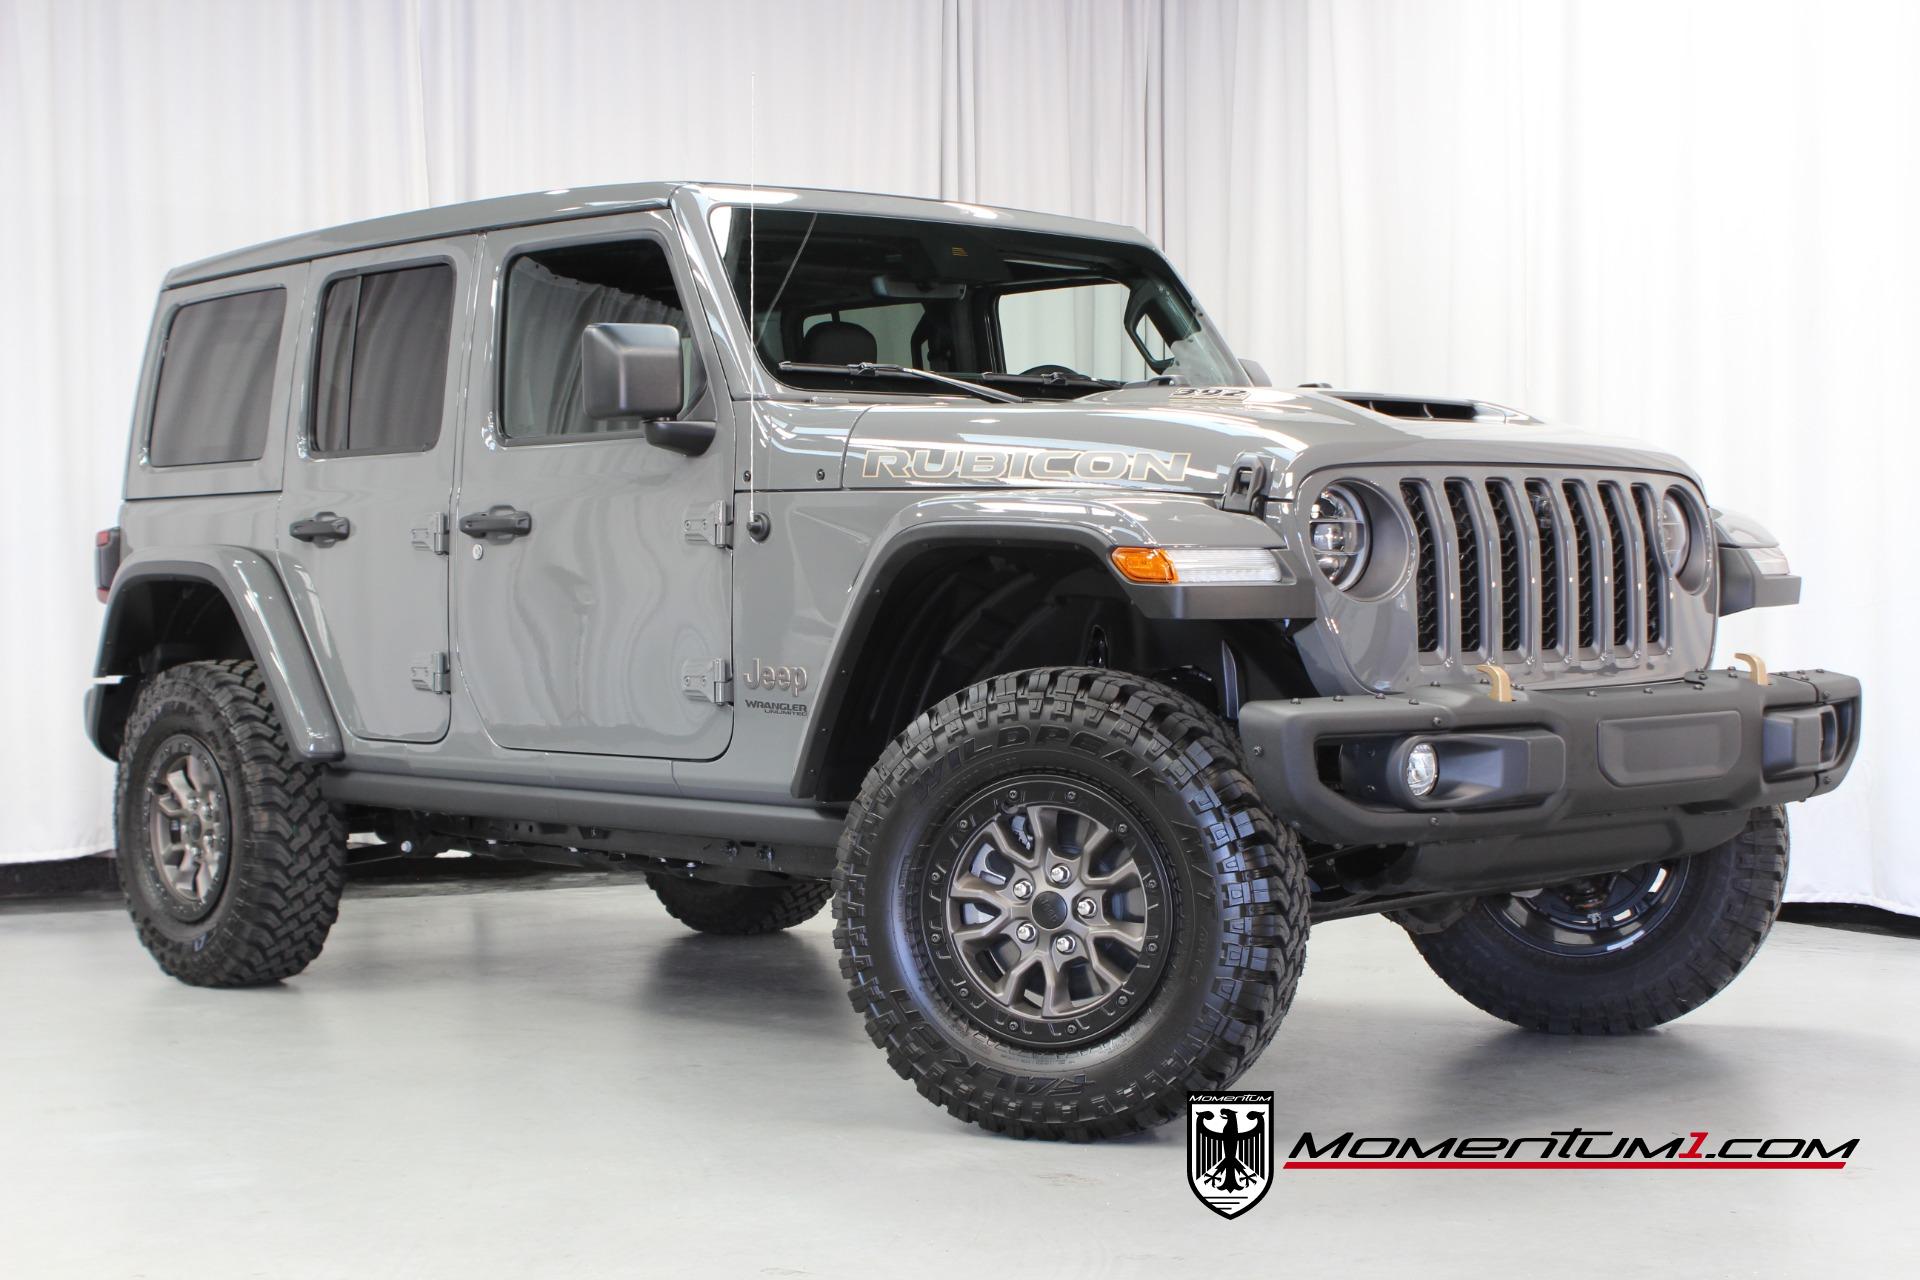 Used 2022 Jeep Wrangler Unlimited Rubicon 392 Skyview Roof For Sale (Sold)  | Momentum Motorcars Inc Stock #111864